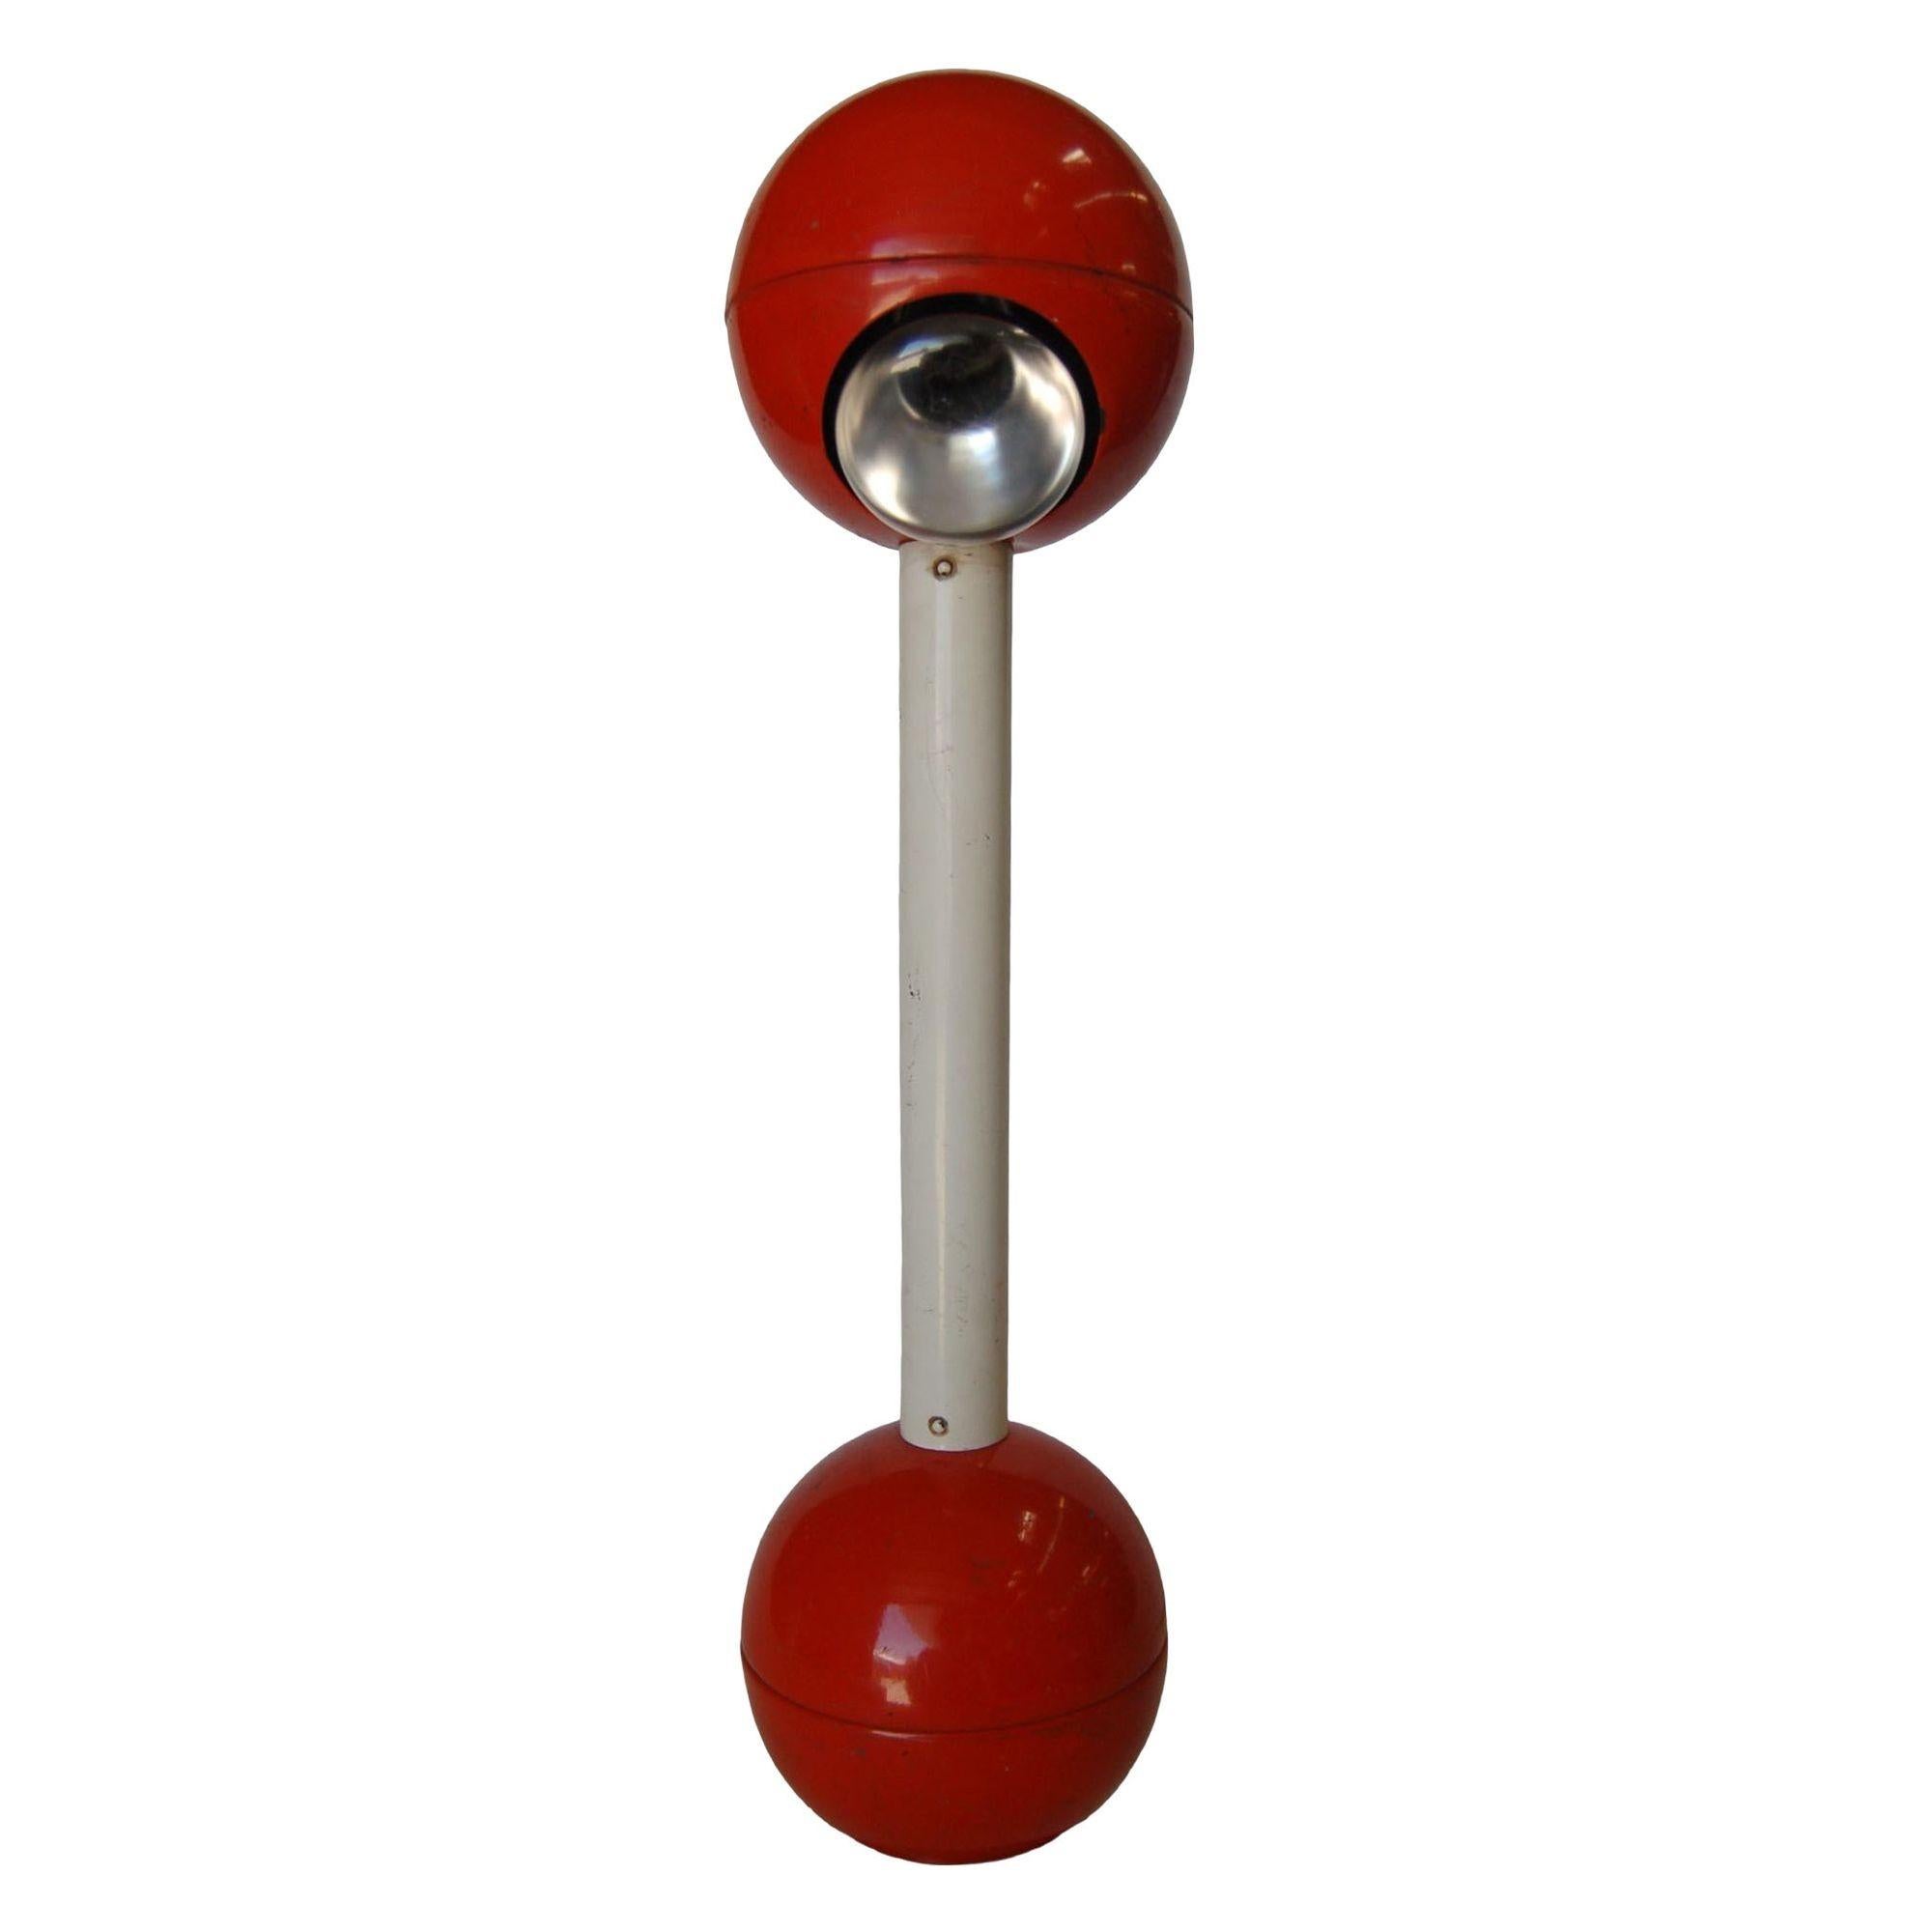 Interesting Mid Century Modern Red Metal Double Ball Barbell Accent Table Lamp On Stand.

Measures 6